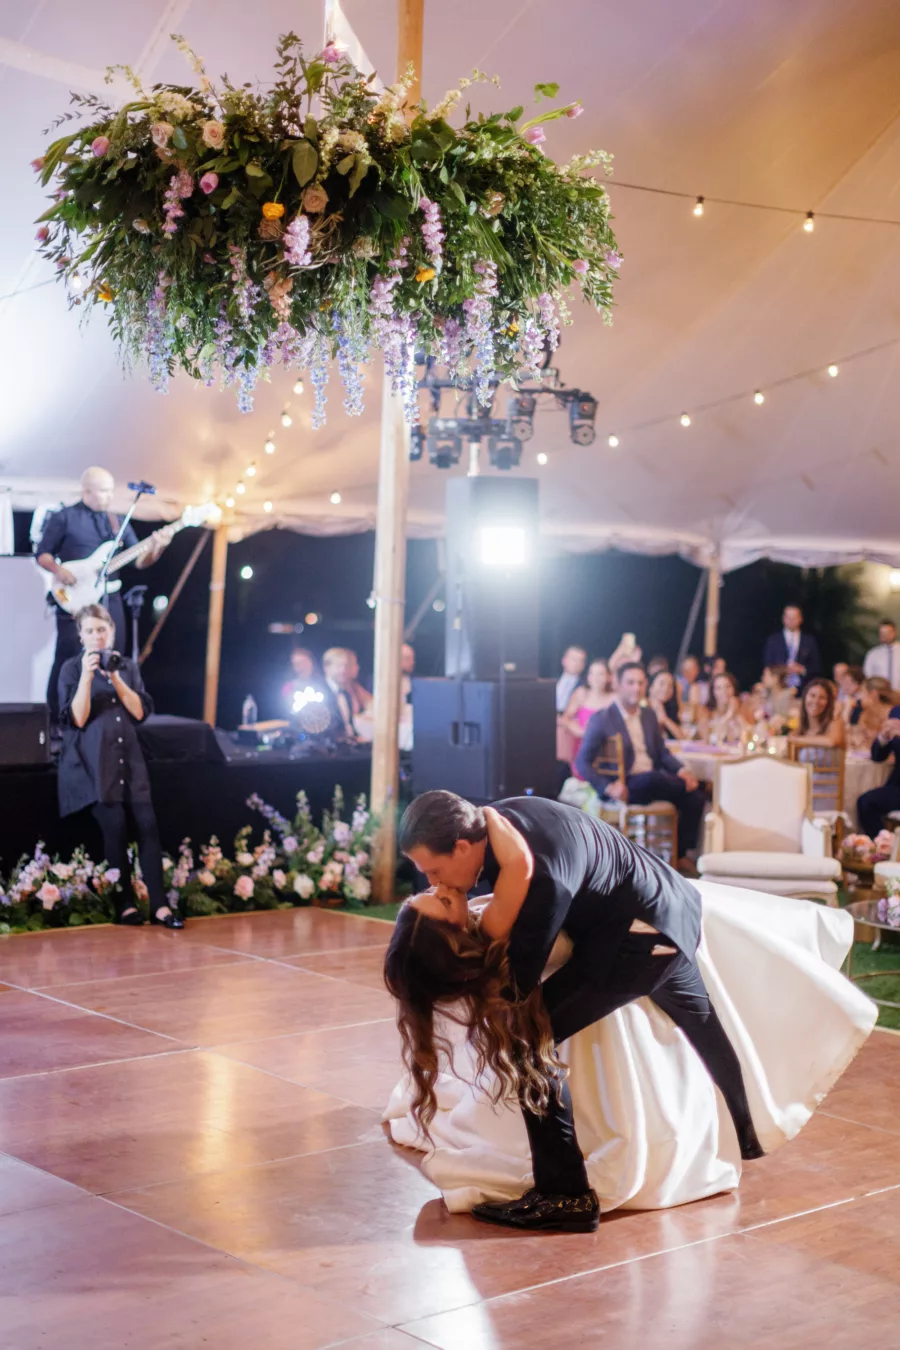 Bride and Groom's Choreographed First Dance Wedding Portrait | Luxurious Tented Old Florida Wedding Reception Ideas